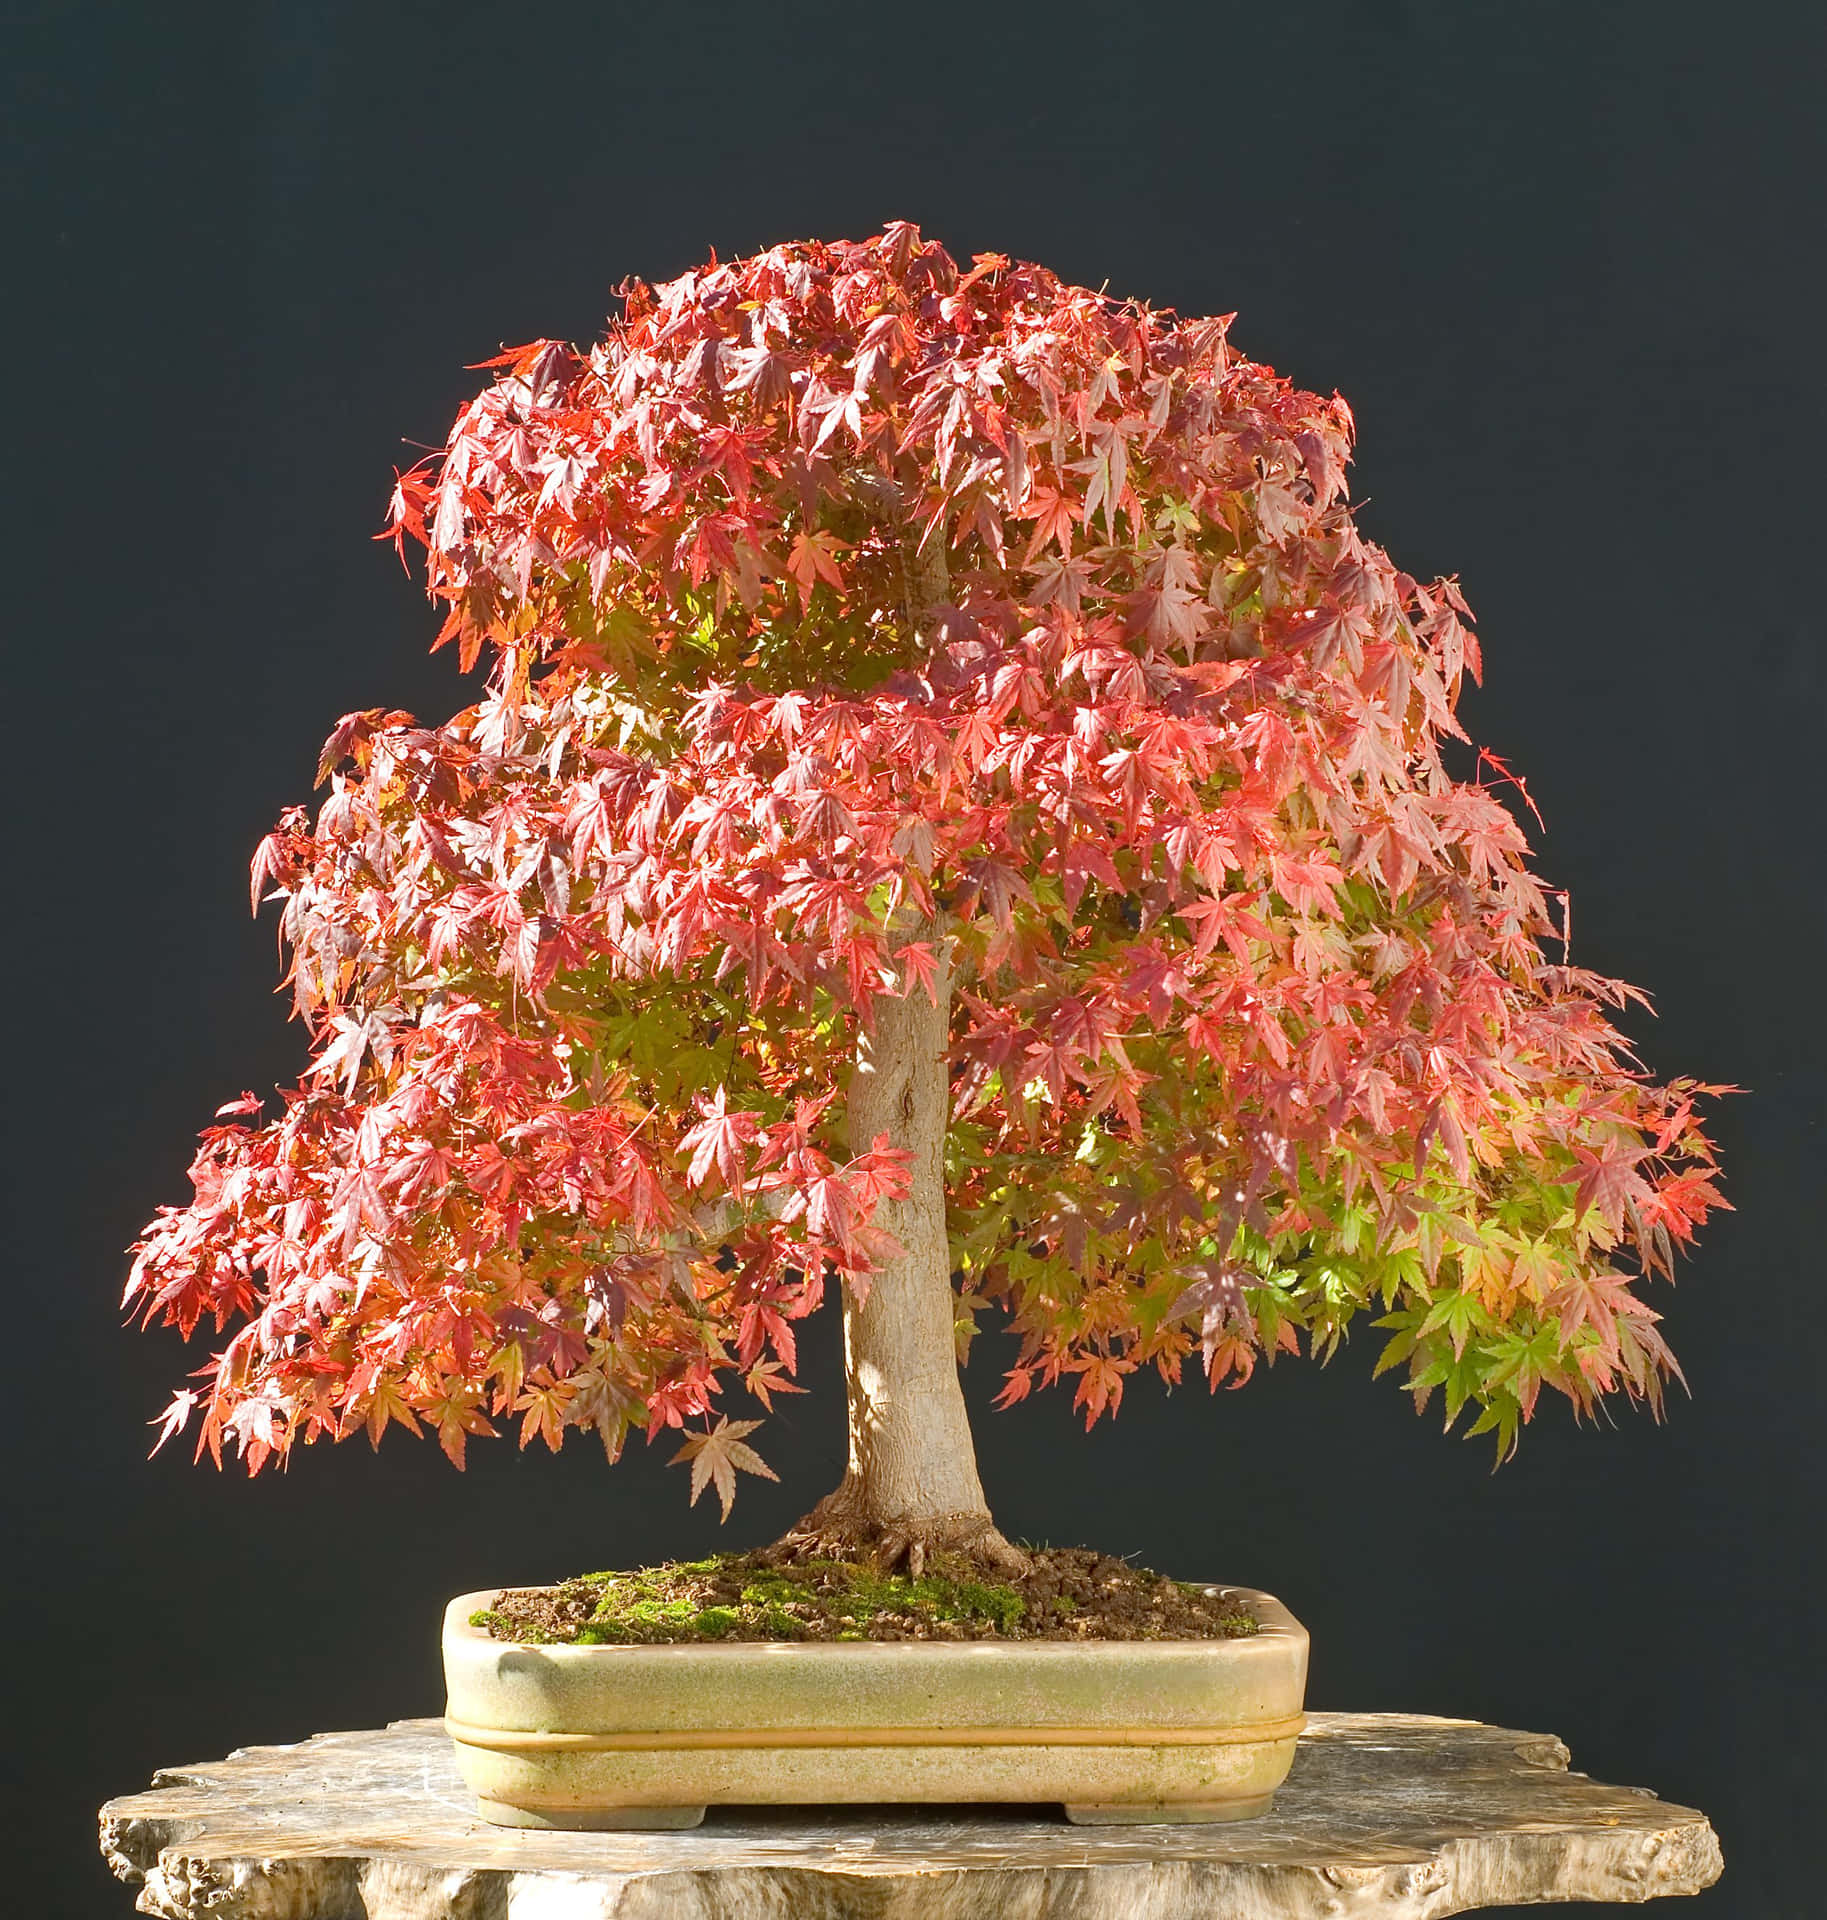 A Bonsai Tree With Red Leaves On Top Of A Rock